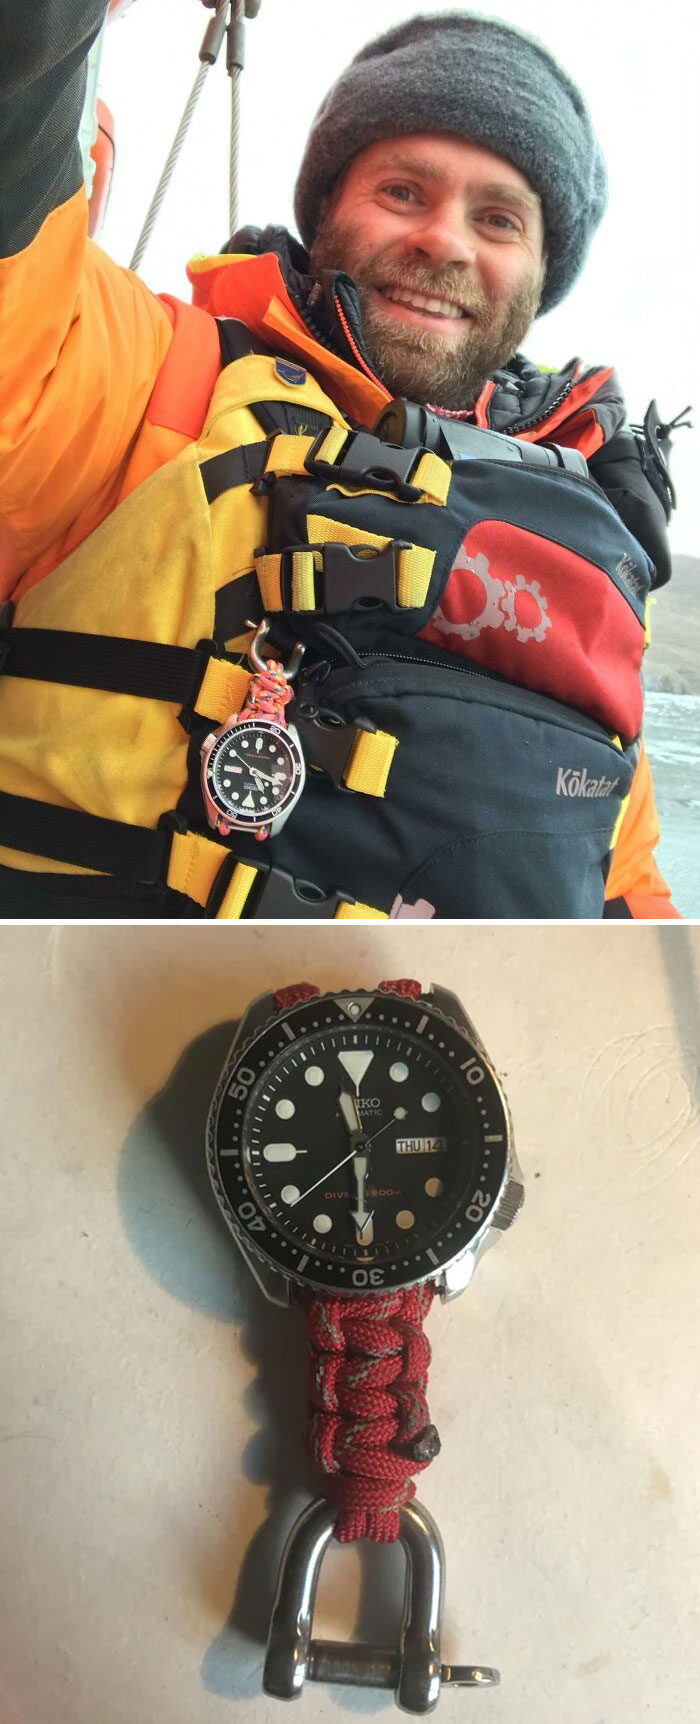 I Work In Antarctica And Can't Wear A Watch On My Wrist Because Of All Of The Layers I Wear, So I Wear This On A Lanyard Attached To My PFD With A Sailing Shackle